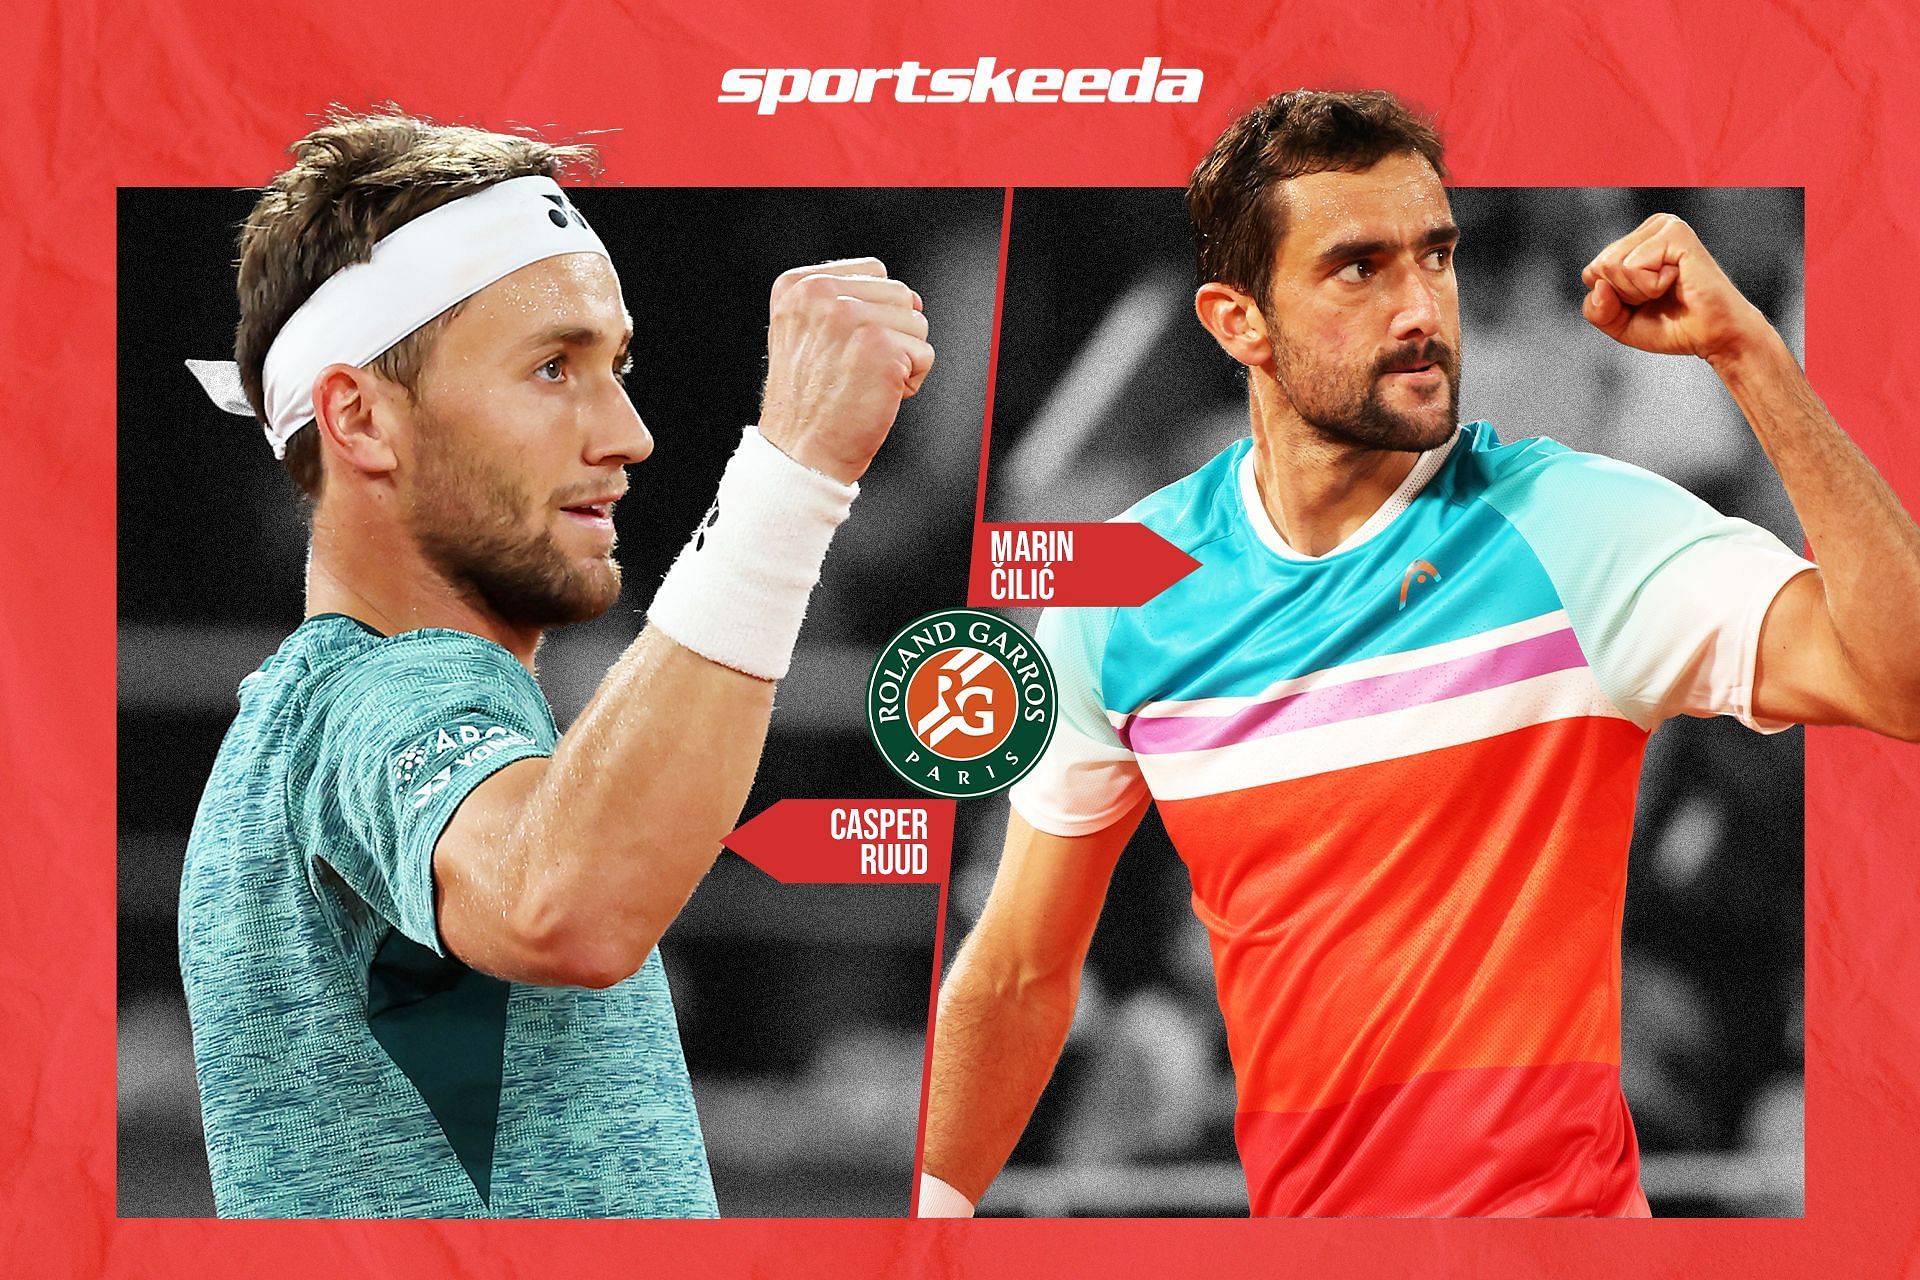 Casper Ruud takes on Marin Cilic in the semifinals of the French Open